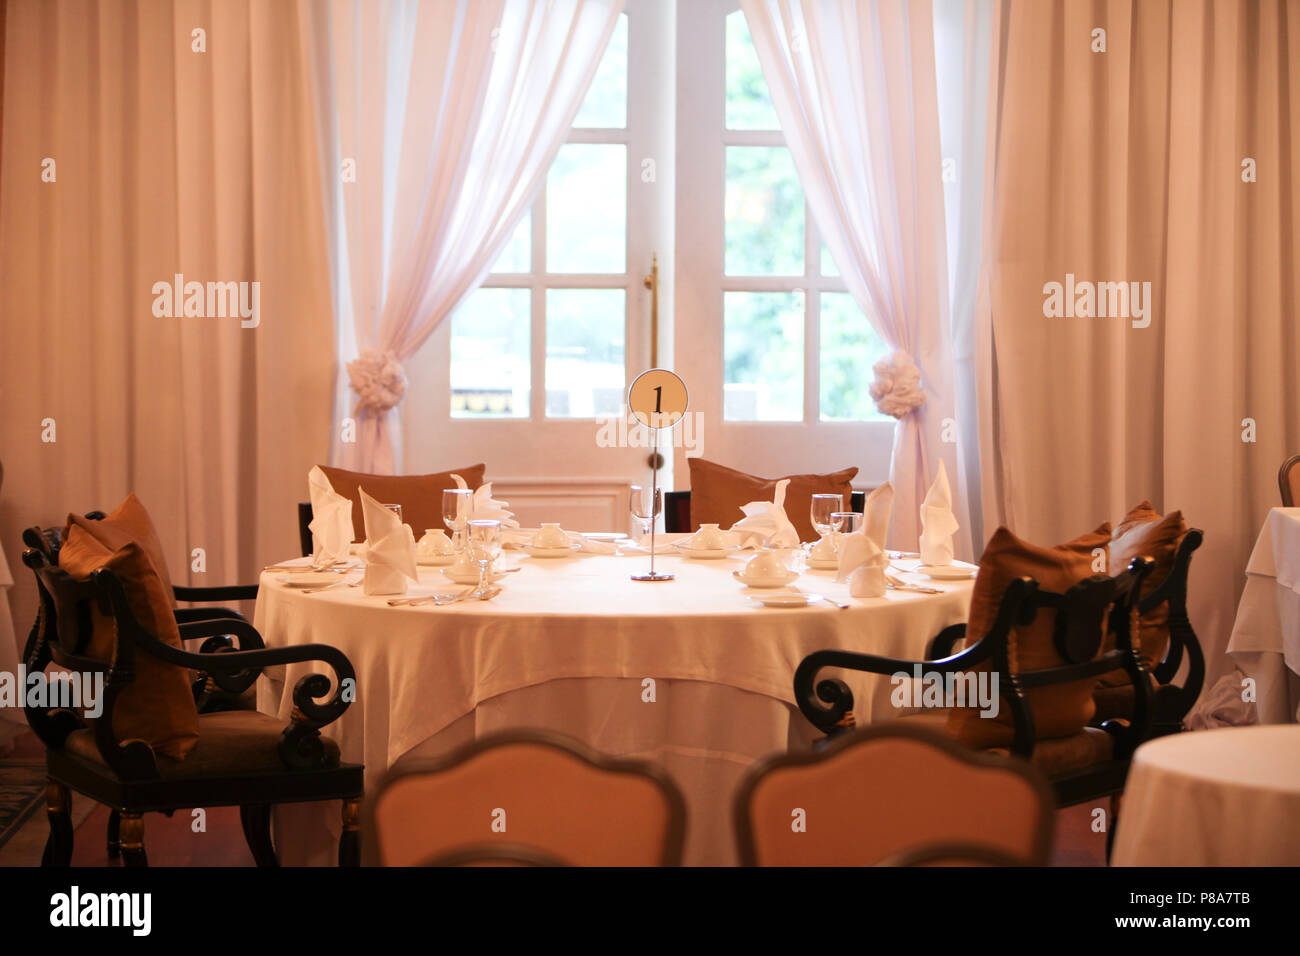 Close-up of a big round numbered table in front of a French window in a festive colonial dining room with white sheer curtains, a white tablecloth and... Stock Photo